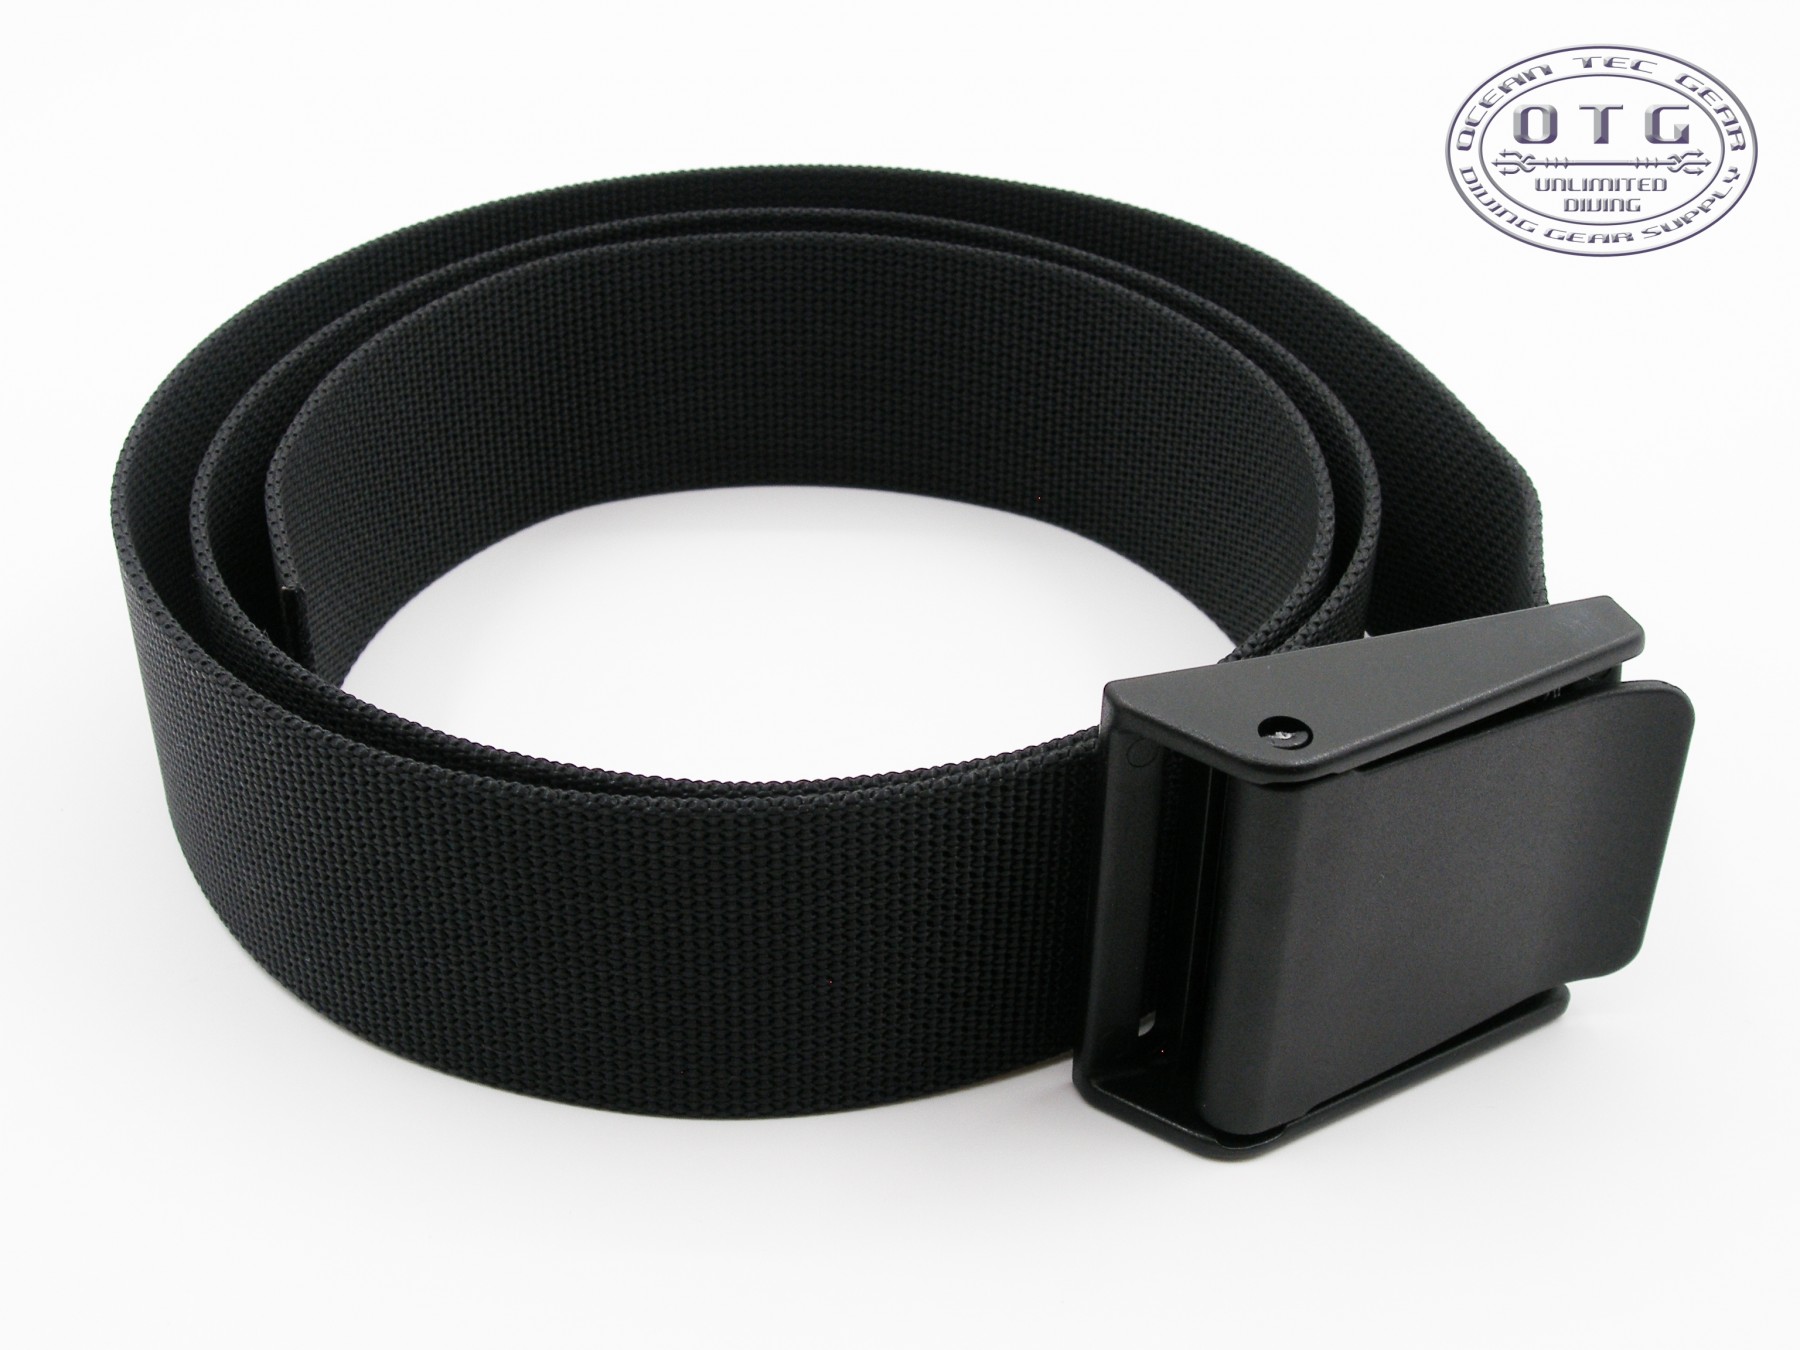 Shapenty 2 Inch Black Nylon Webbing Strap Weave Strapping Replacement for  Belts, Buckles, Bags, DIY …See more Shapenty 2 Inch Black Nylon Webbing